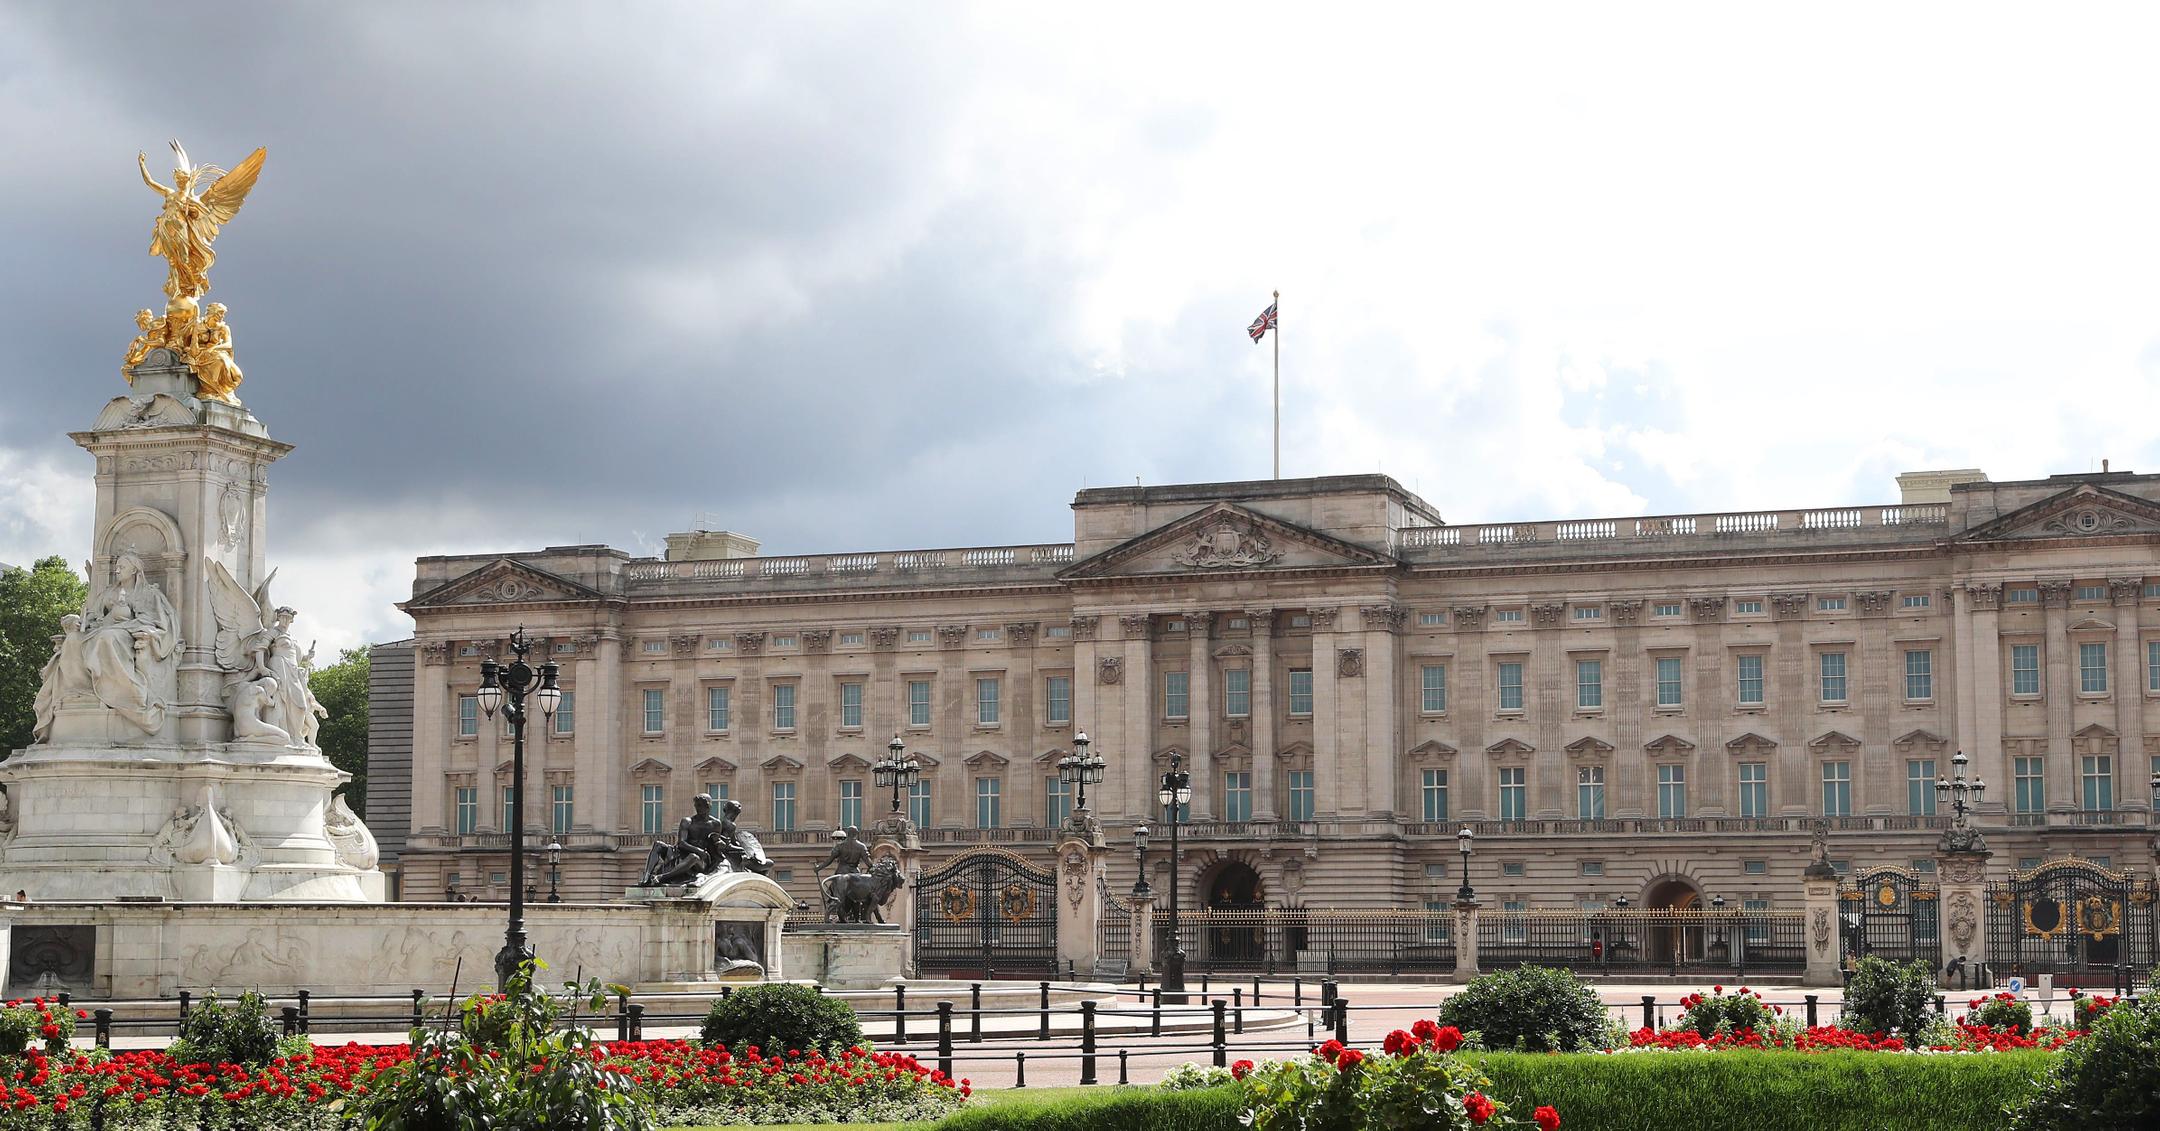 Why Is Buckingham Palace Boarded Up? The Queen Isn't Staying There Now